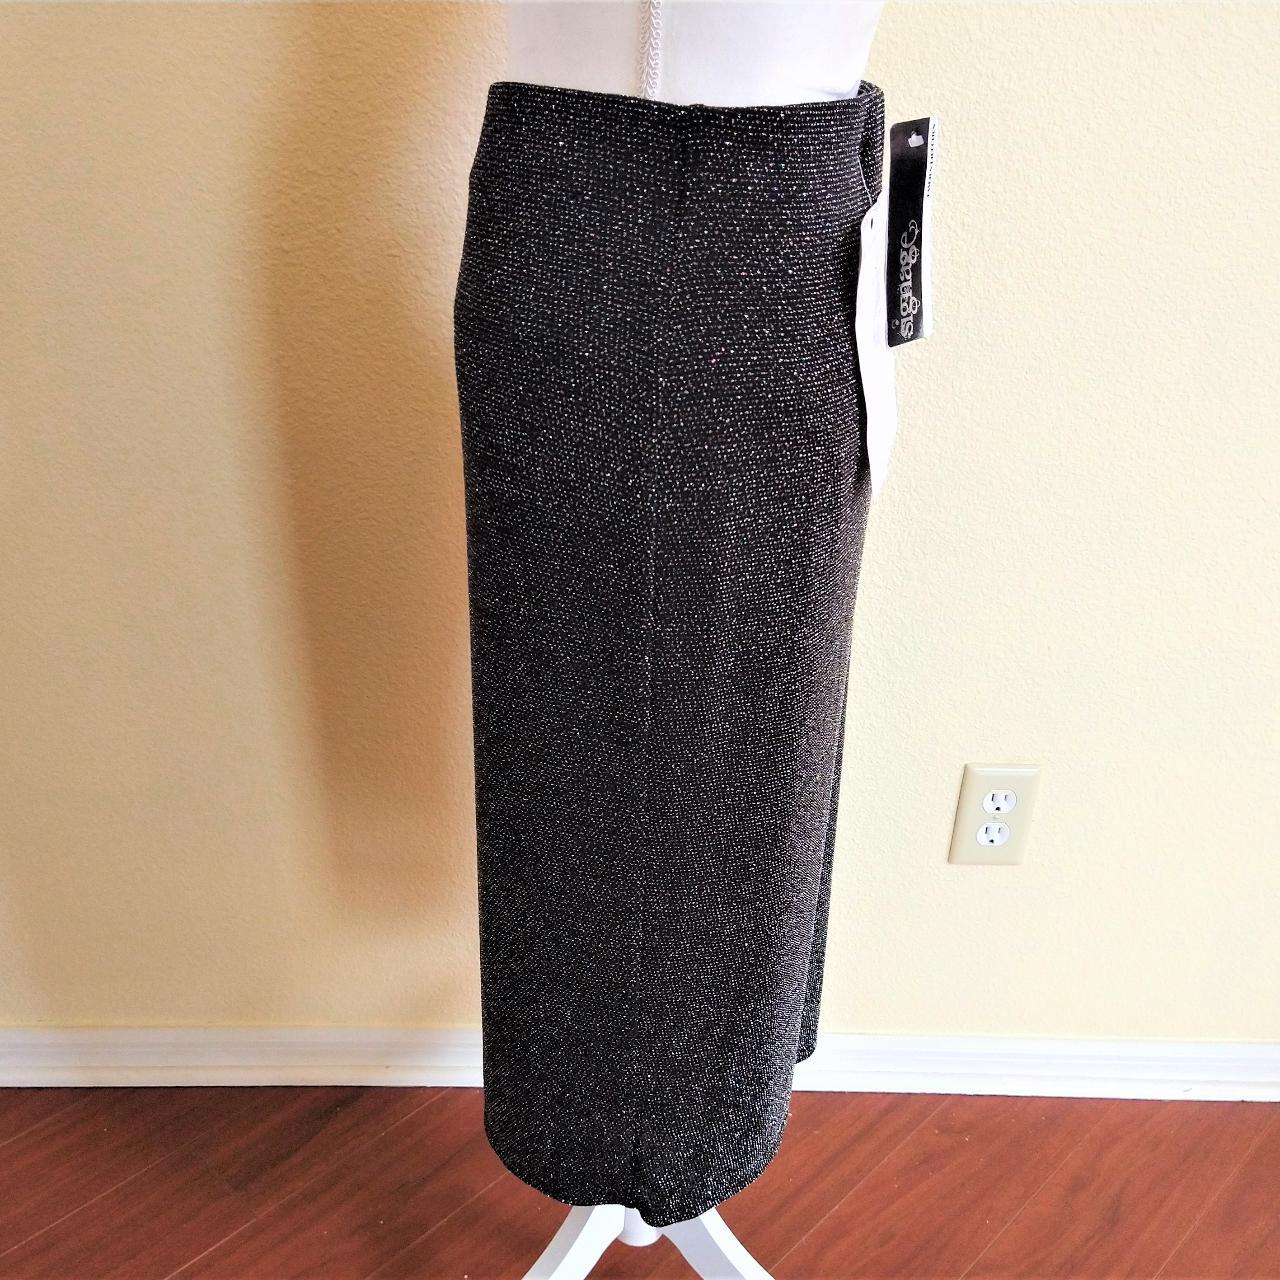 Product Image 3 - Black and Silver Glitter Skirt

Brand